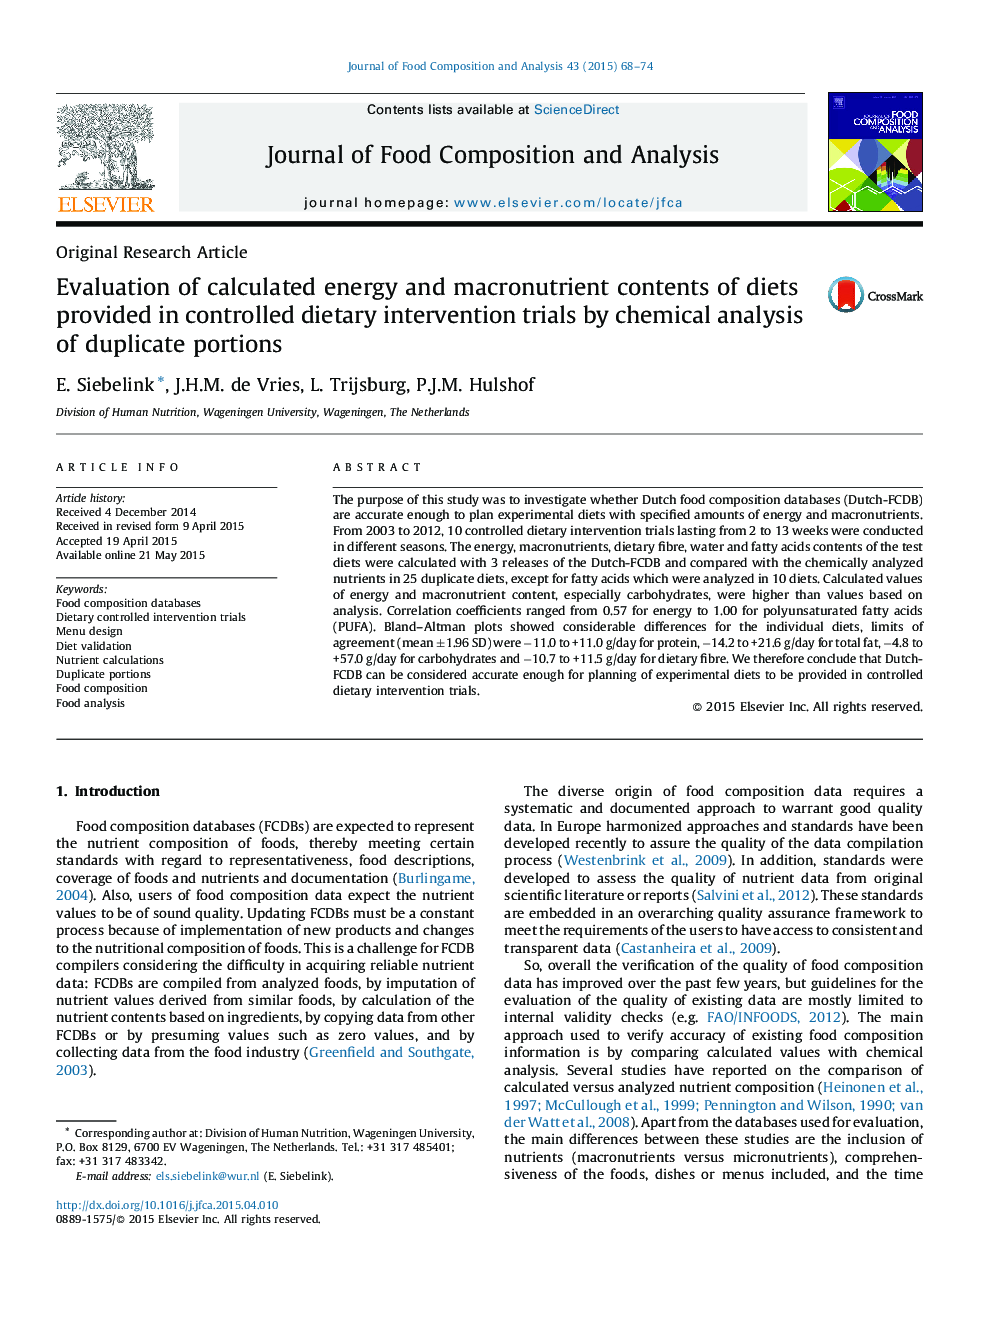 Evaluation of calculated energy and macronutrient contents of diets provided in controlled dietary intervention trials by chemical analysis of duplicate portions